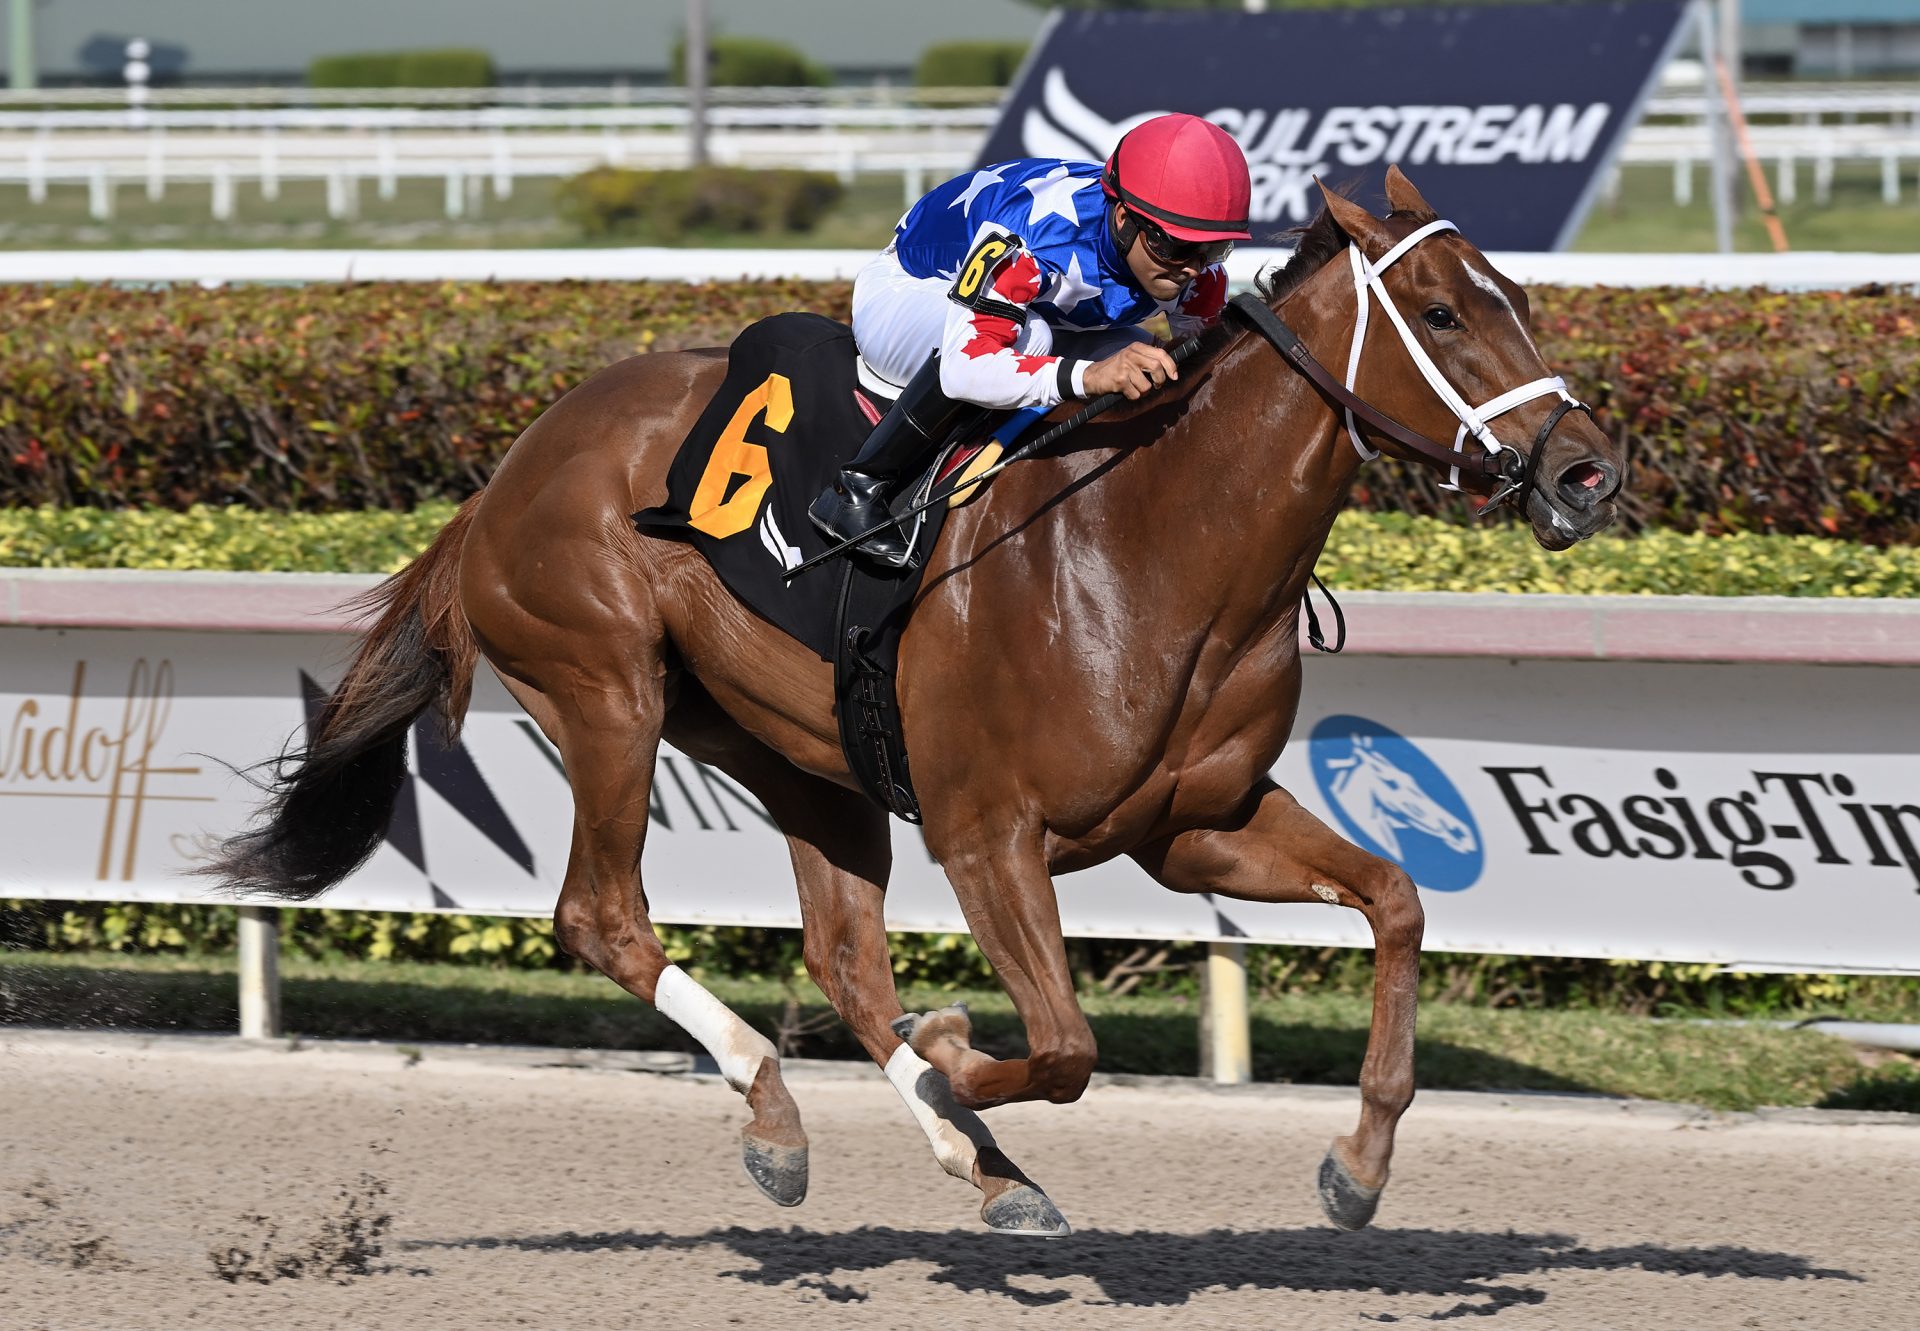 Girl With A Dream (Practical Joke) winning the Gr.3 Forward Gal Stakes at Gulfstream Park